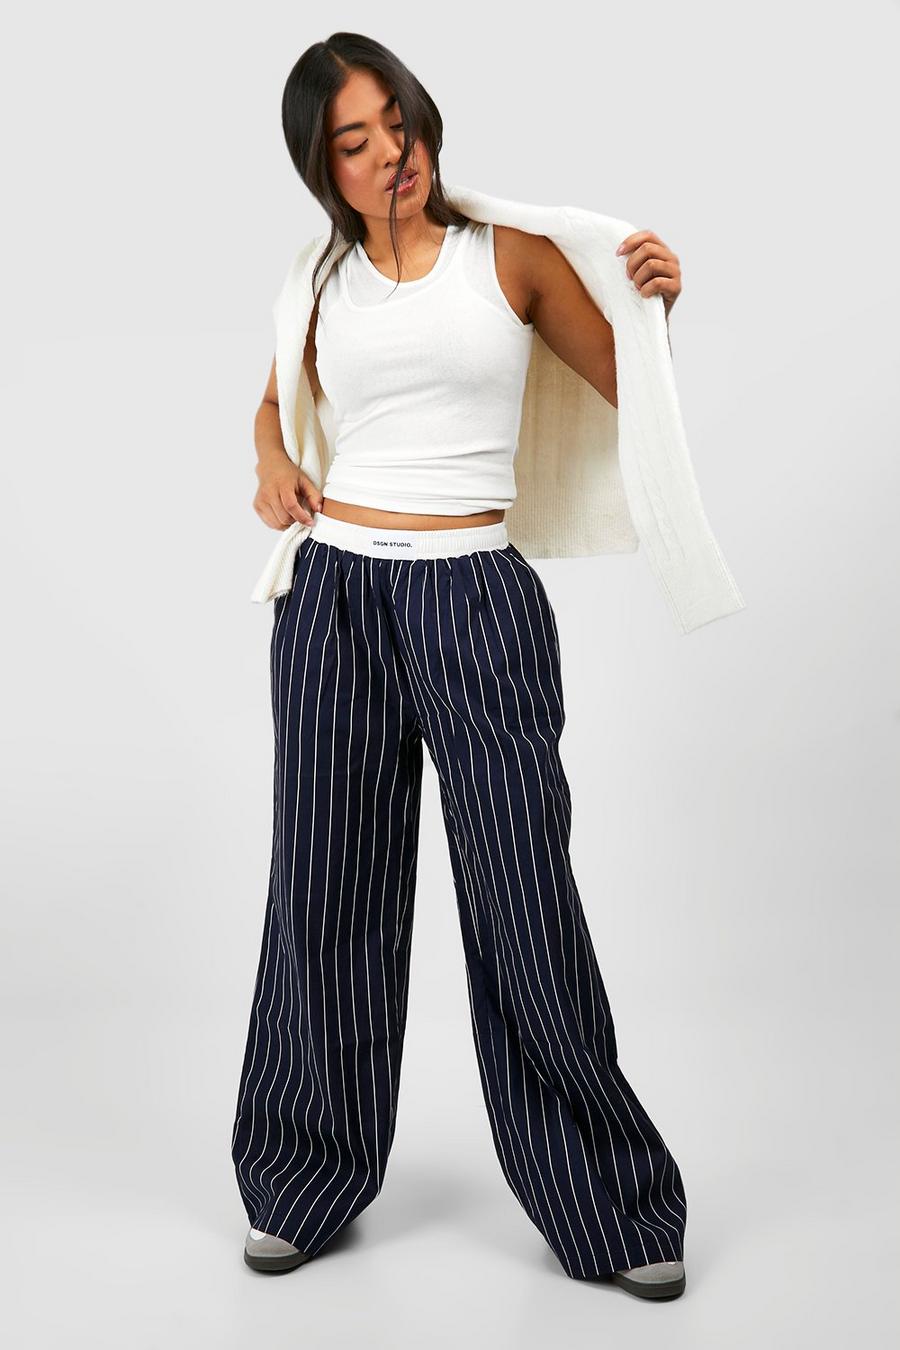 Stand Up For What is Stripe Pants